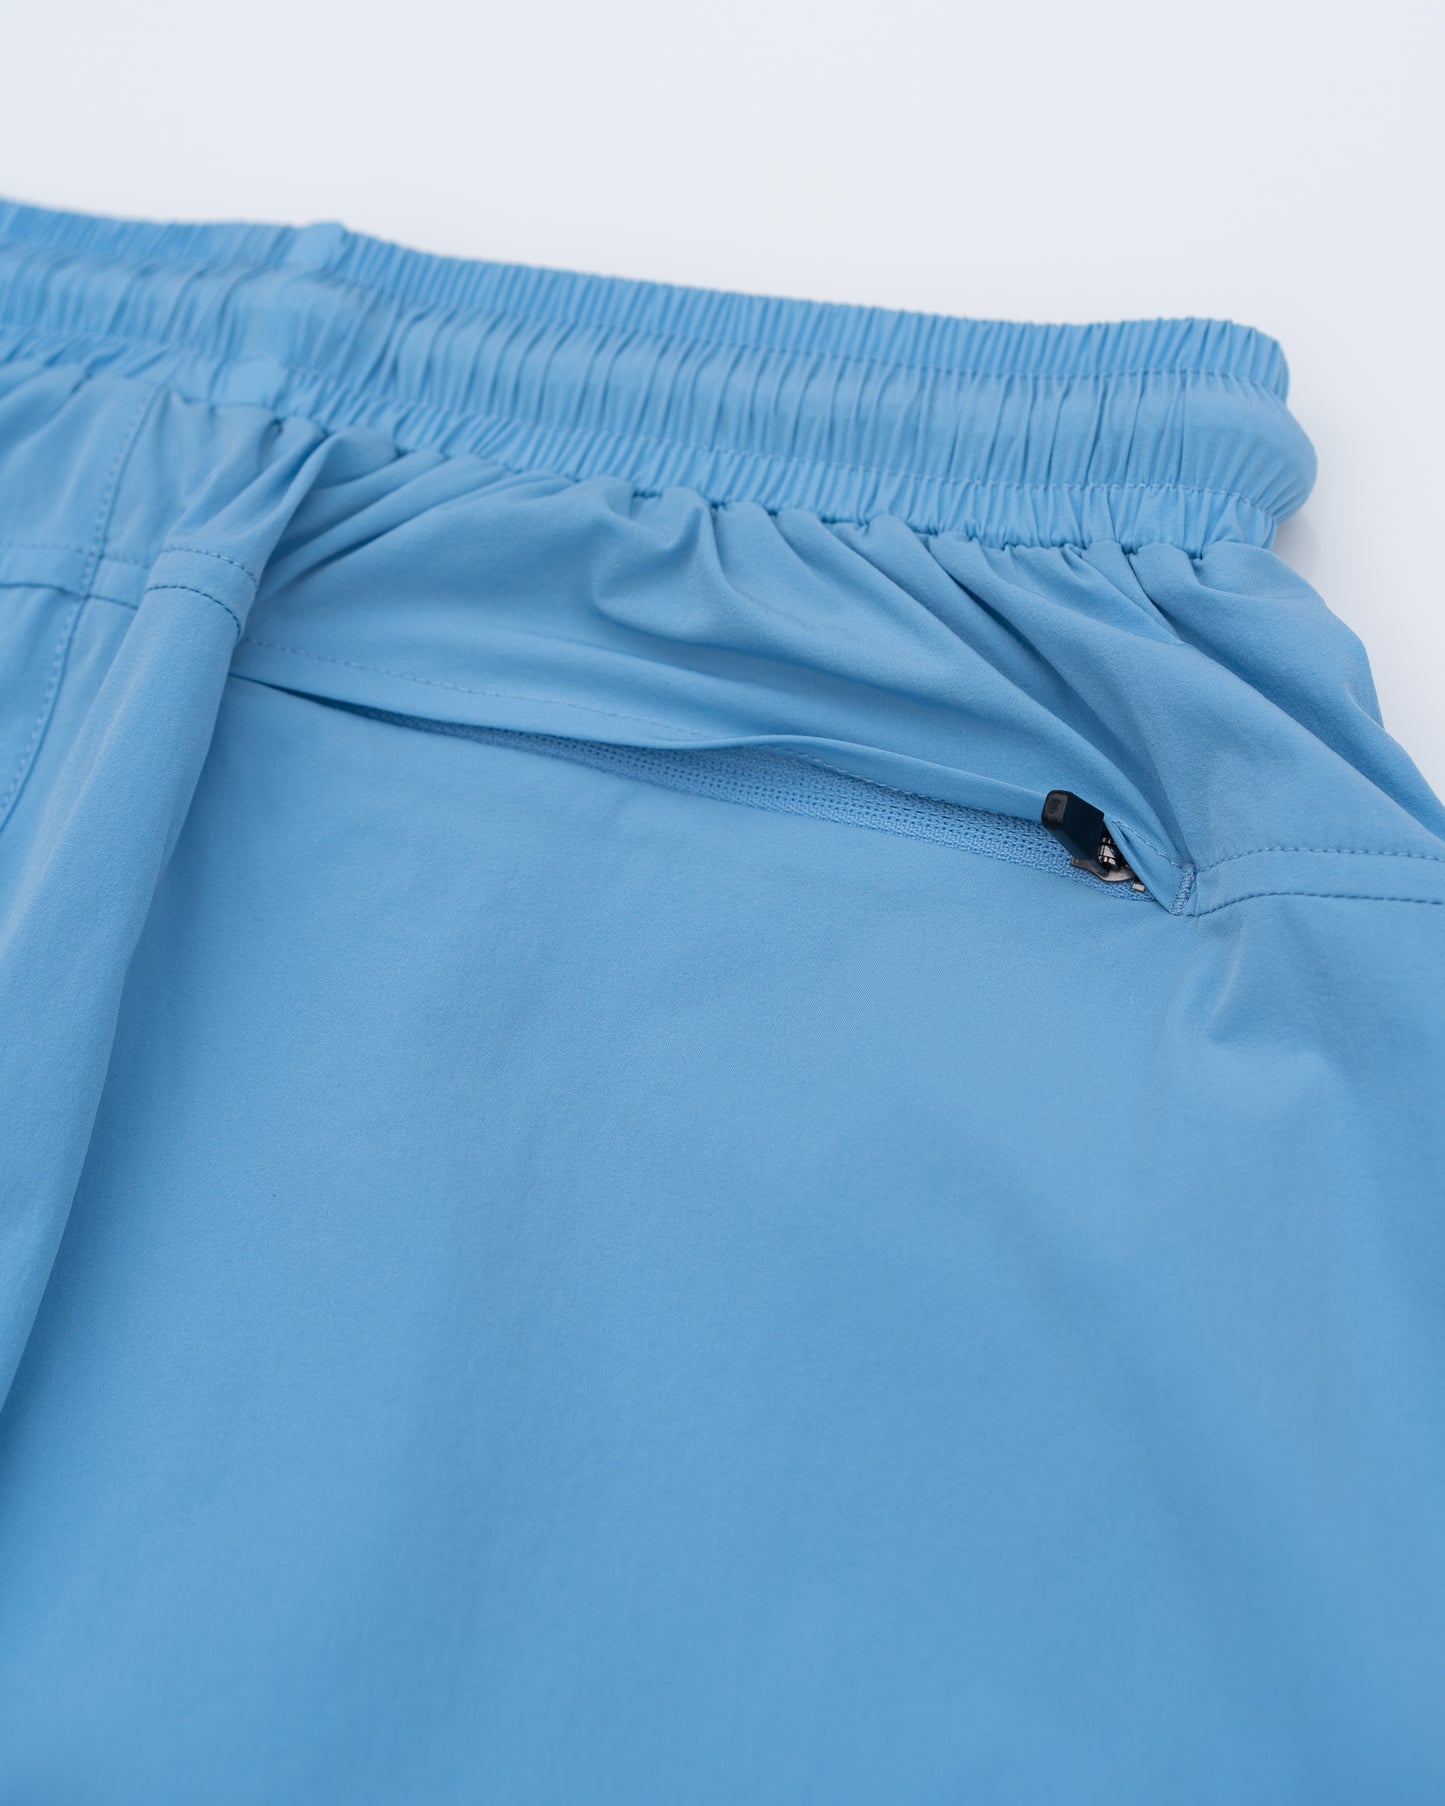 Refined Active Shorts (Baby Blue)